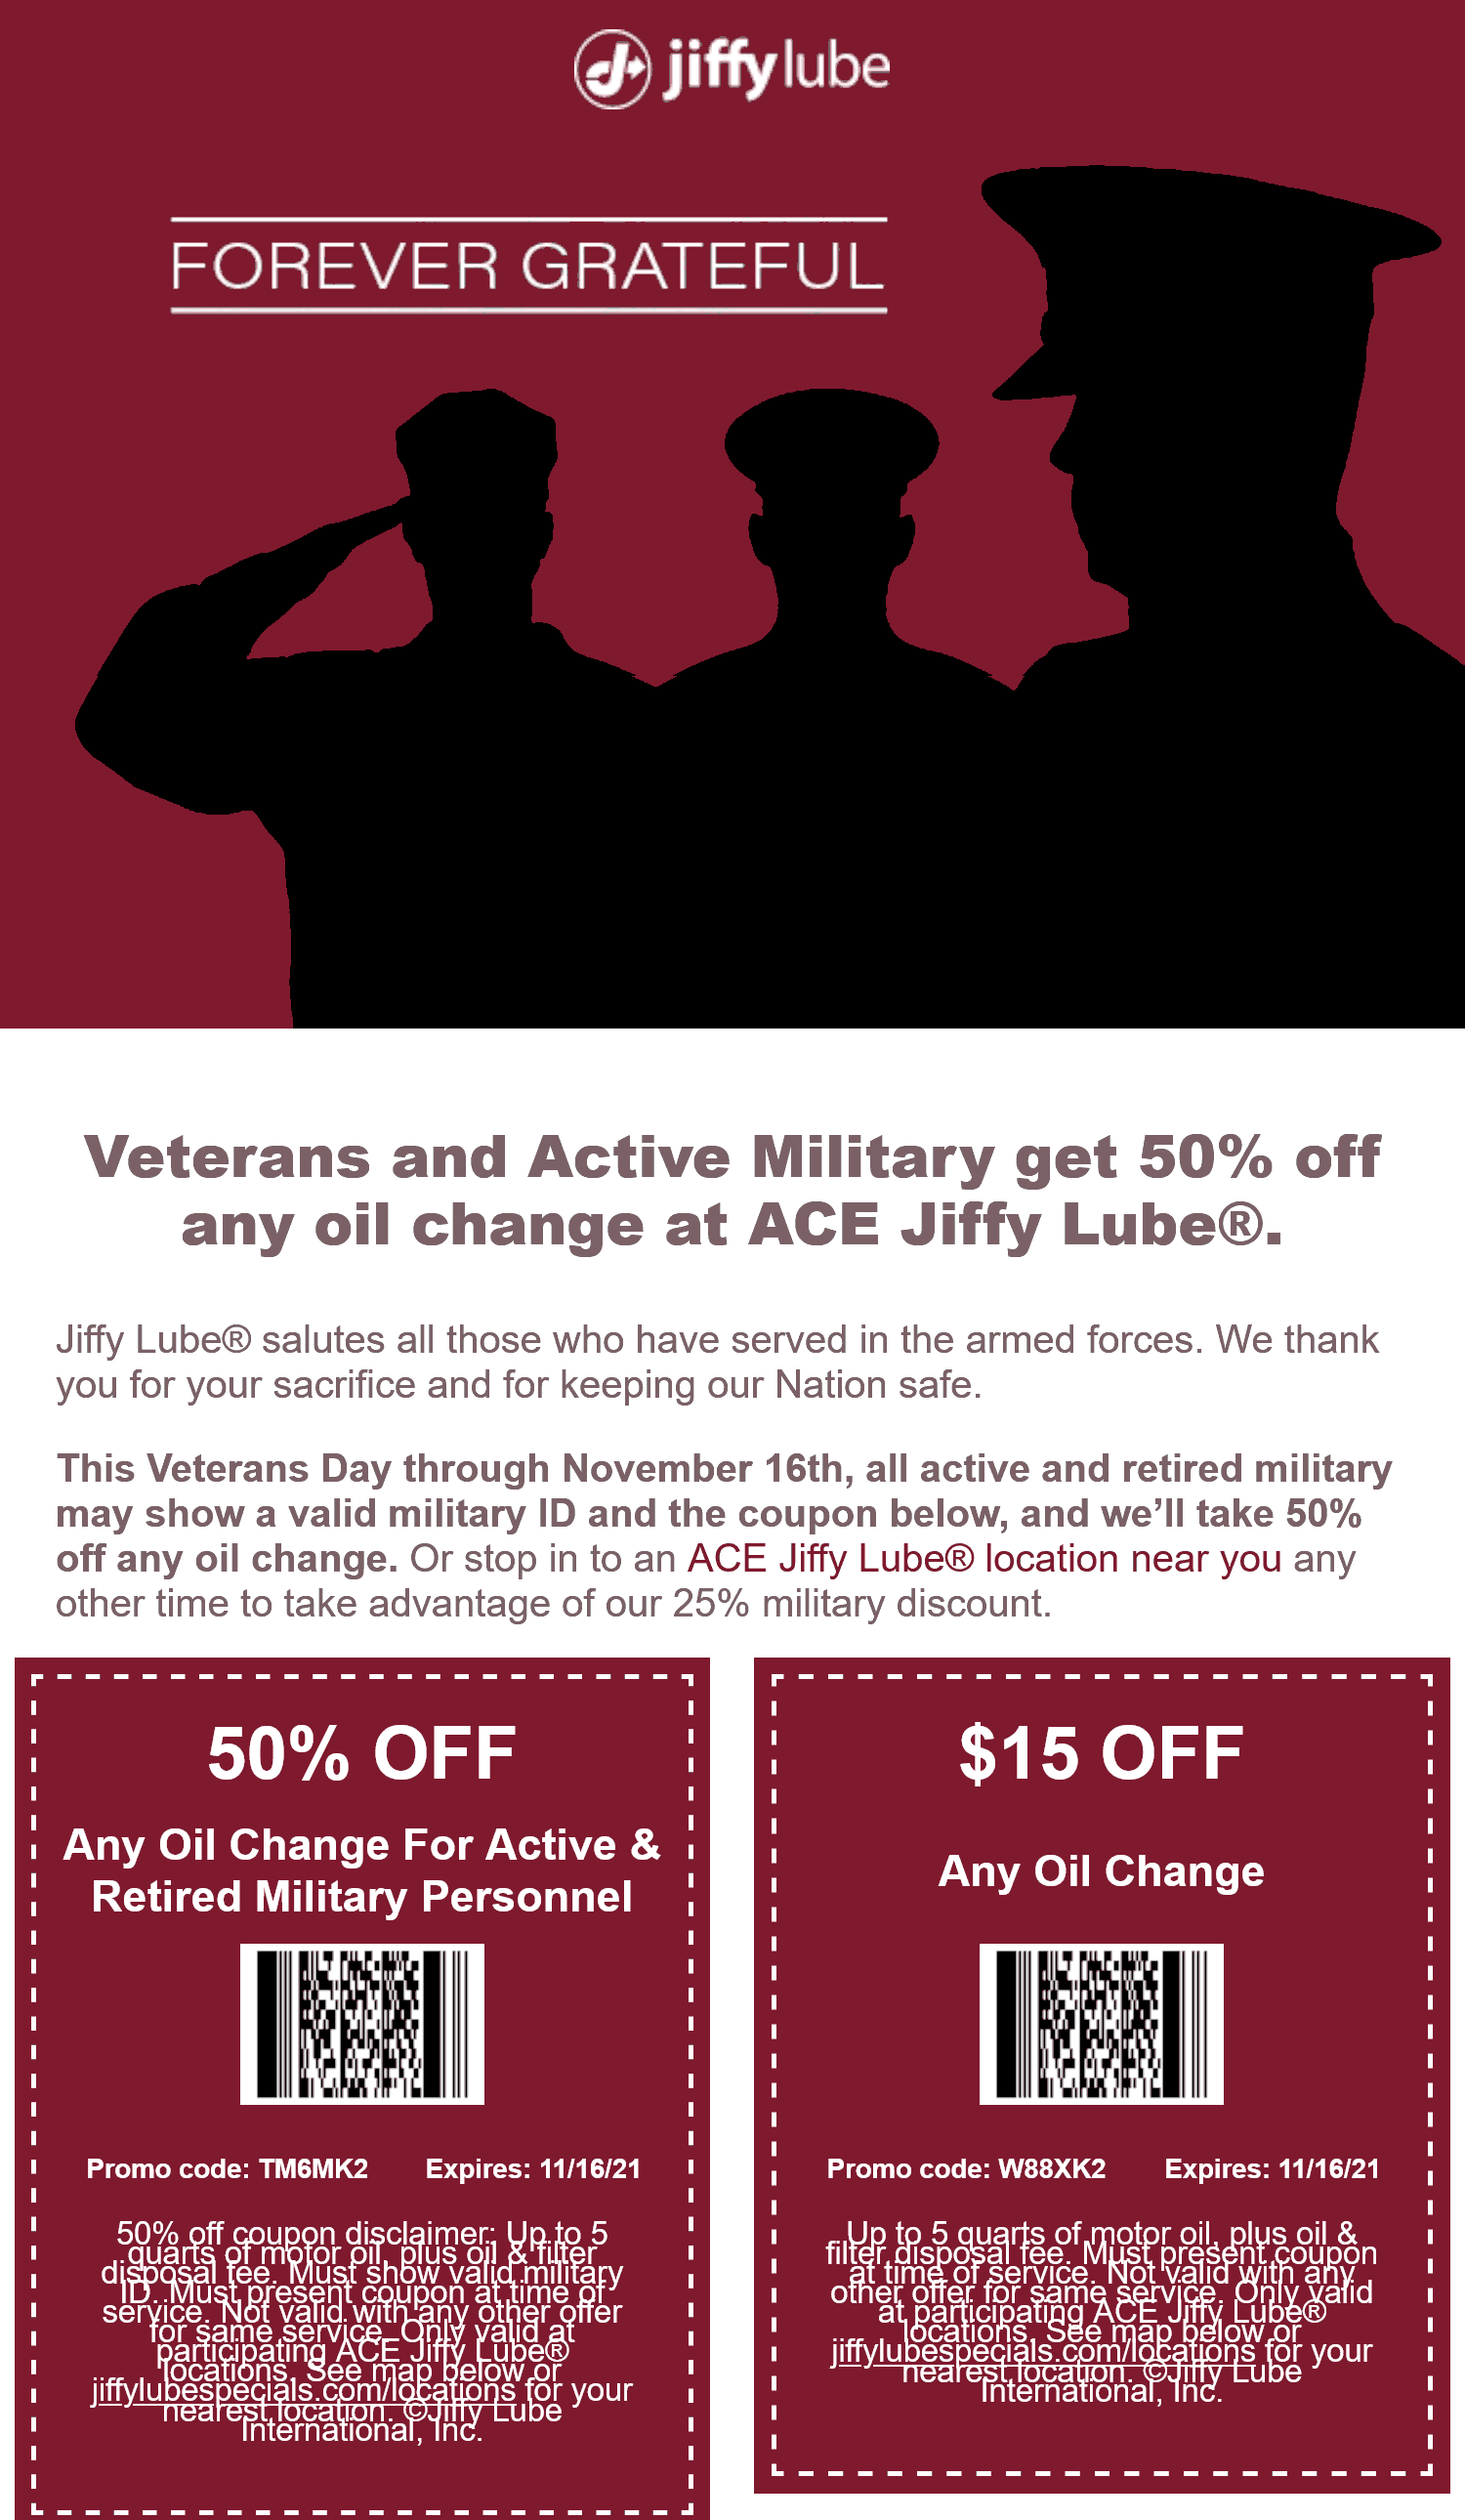 Jiffy Lube stores Coupon  Veterans & active score 50% off an oil change at Jiffy Lube #jiffylube 